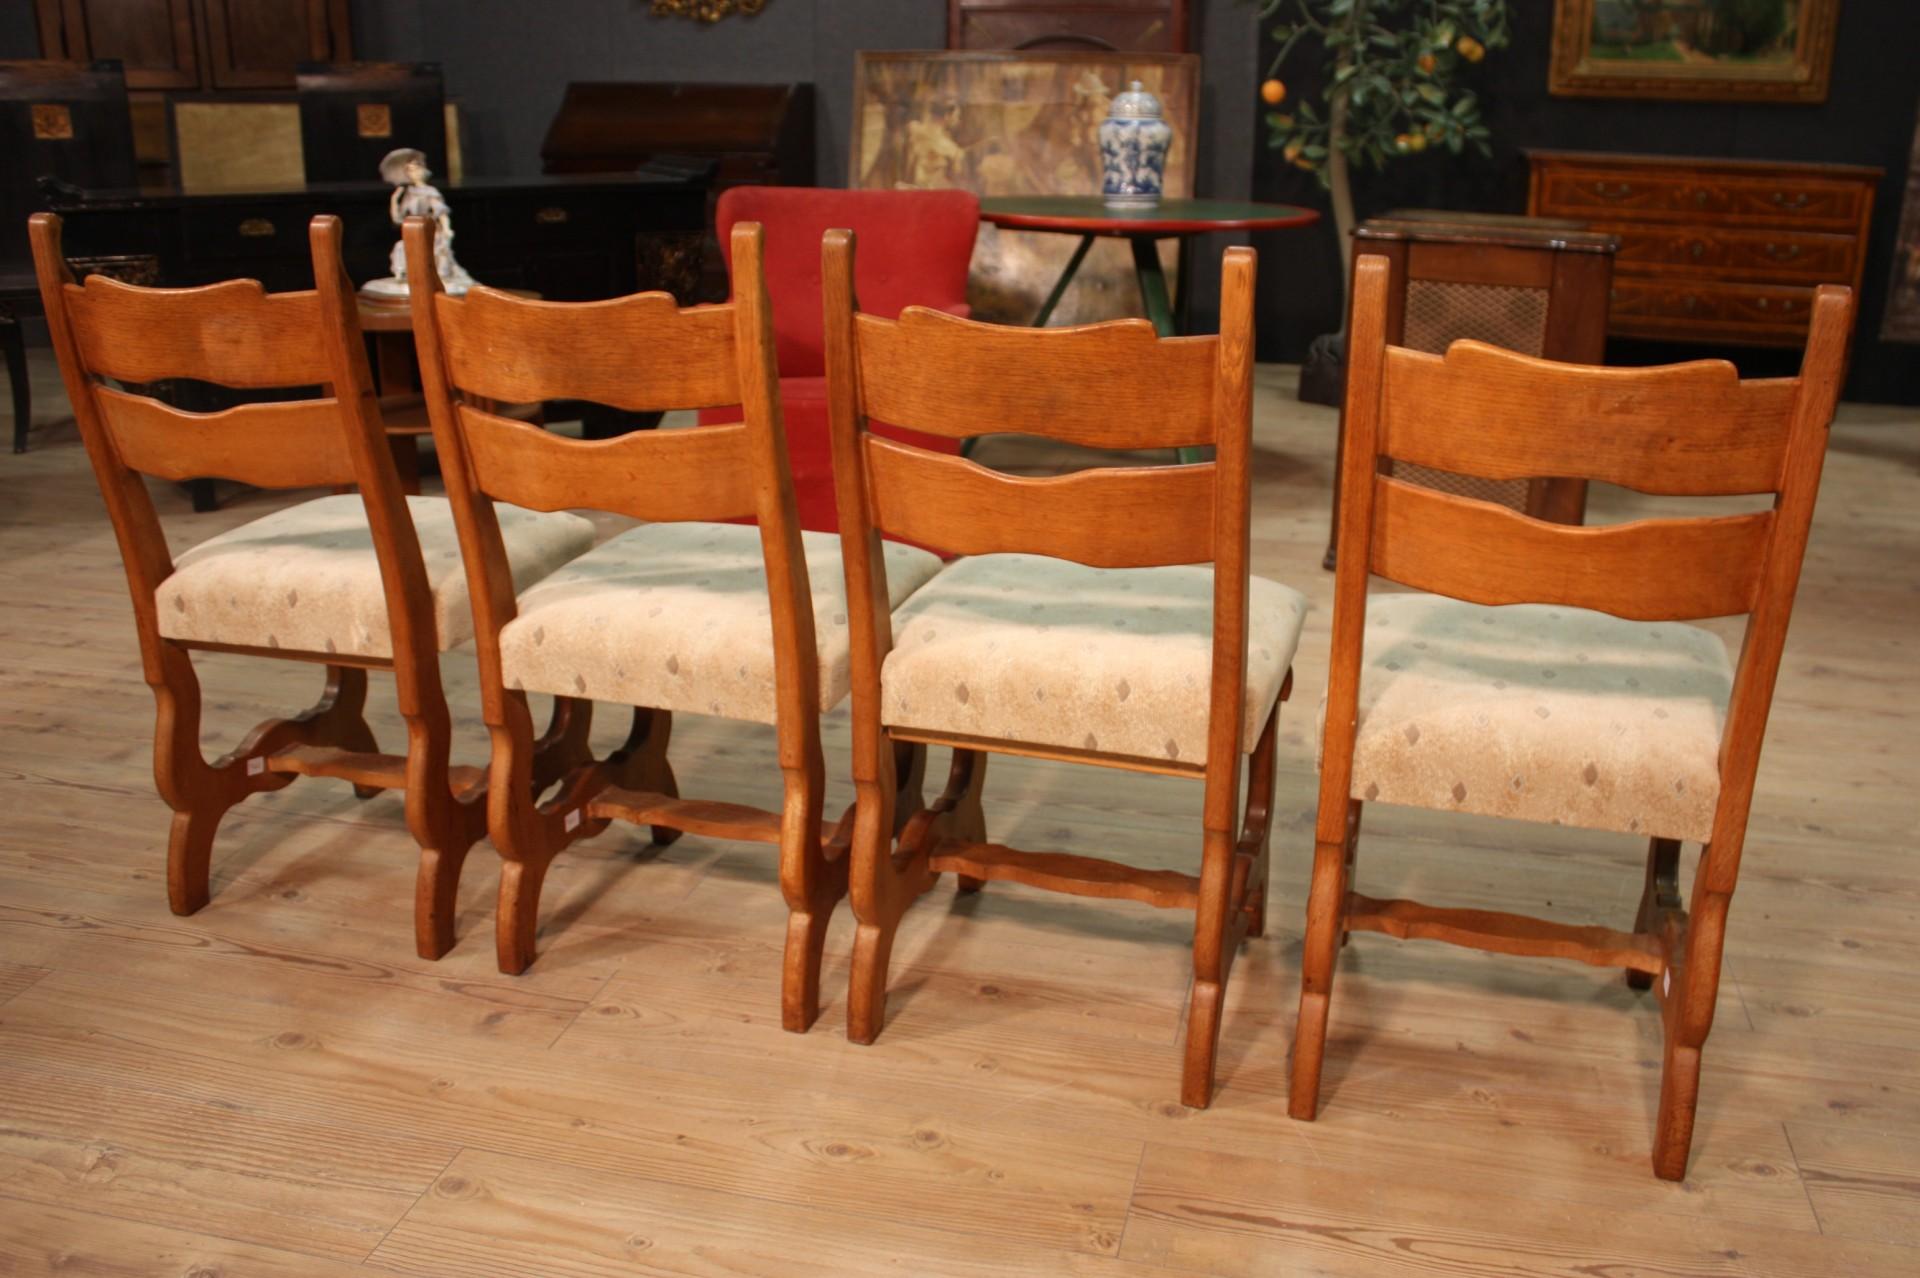 Group of 4 Rustic Northern European Chairs, 20th Century For Sale 2